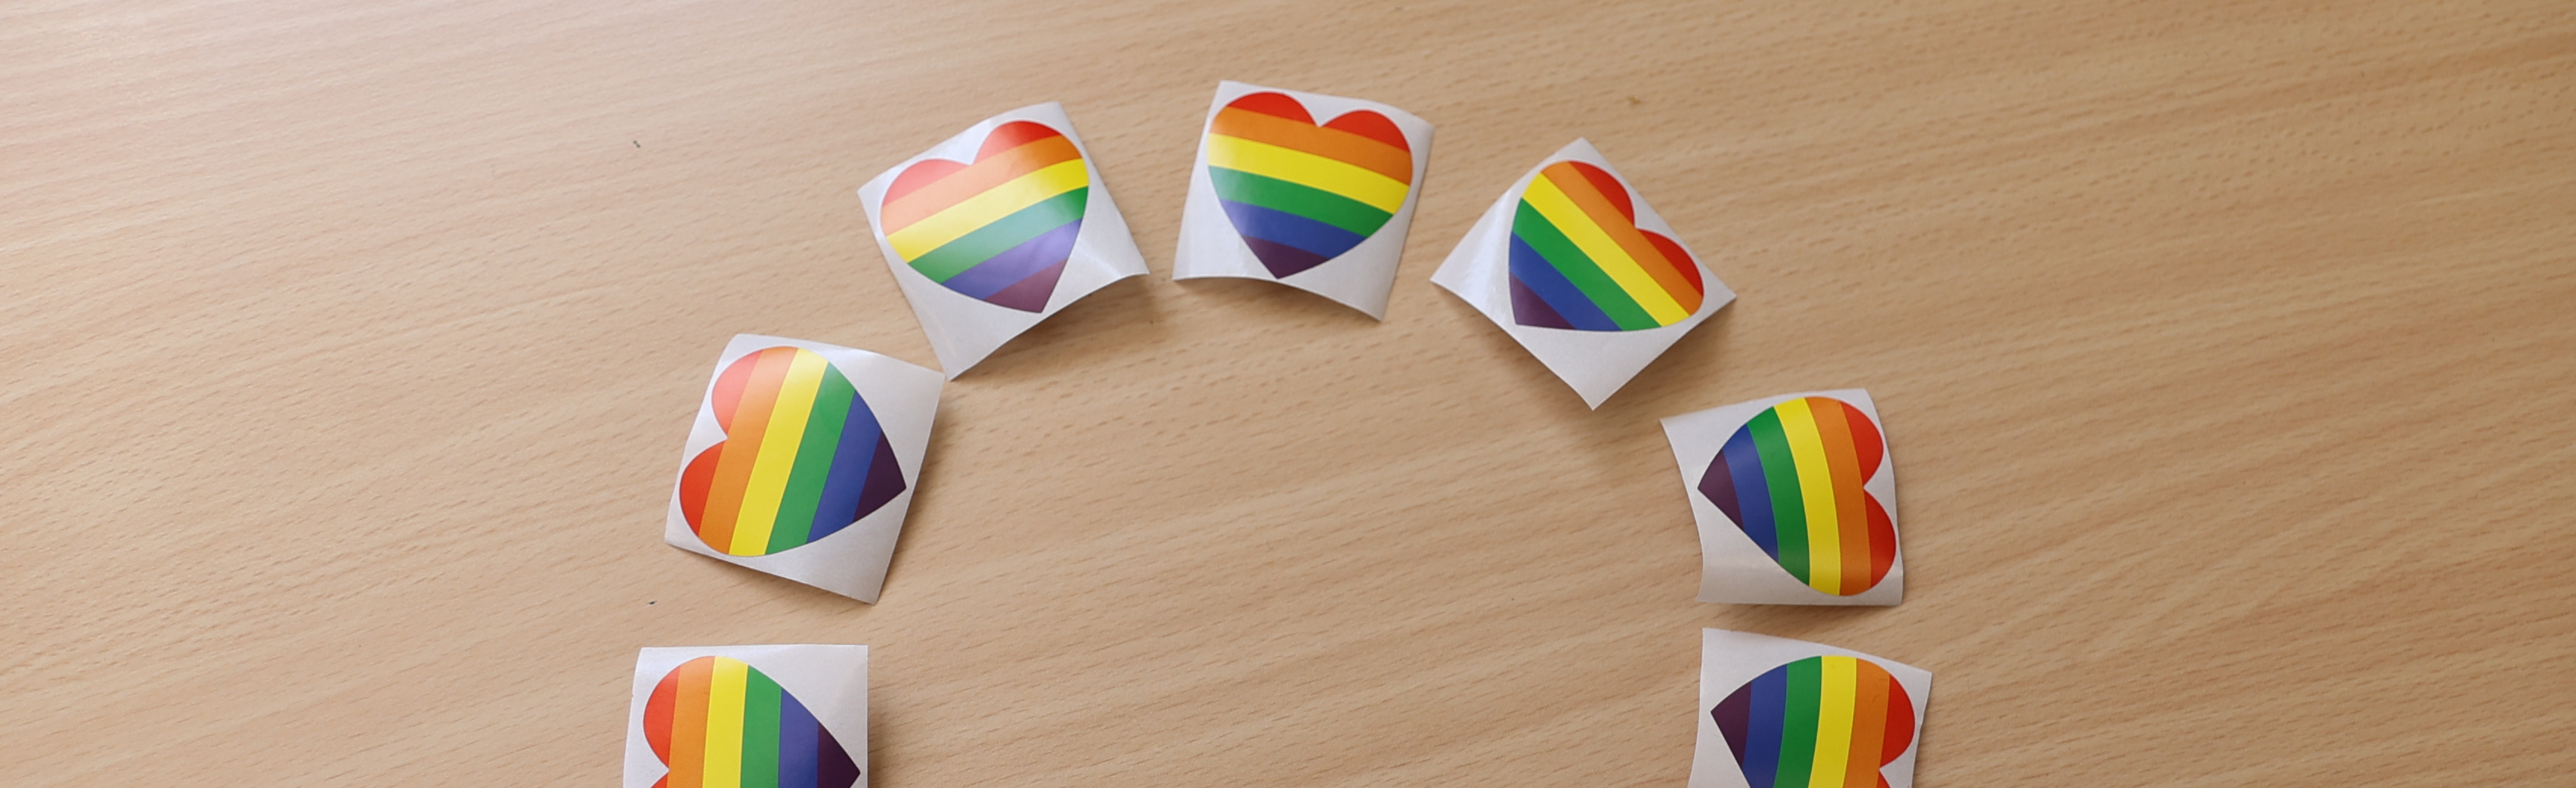 Rainbow heart stickers in a circle